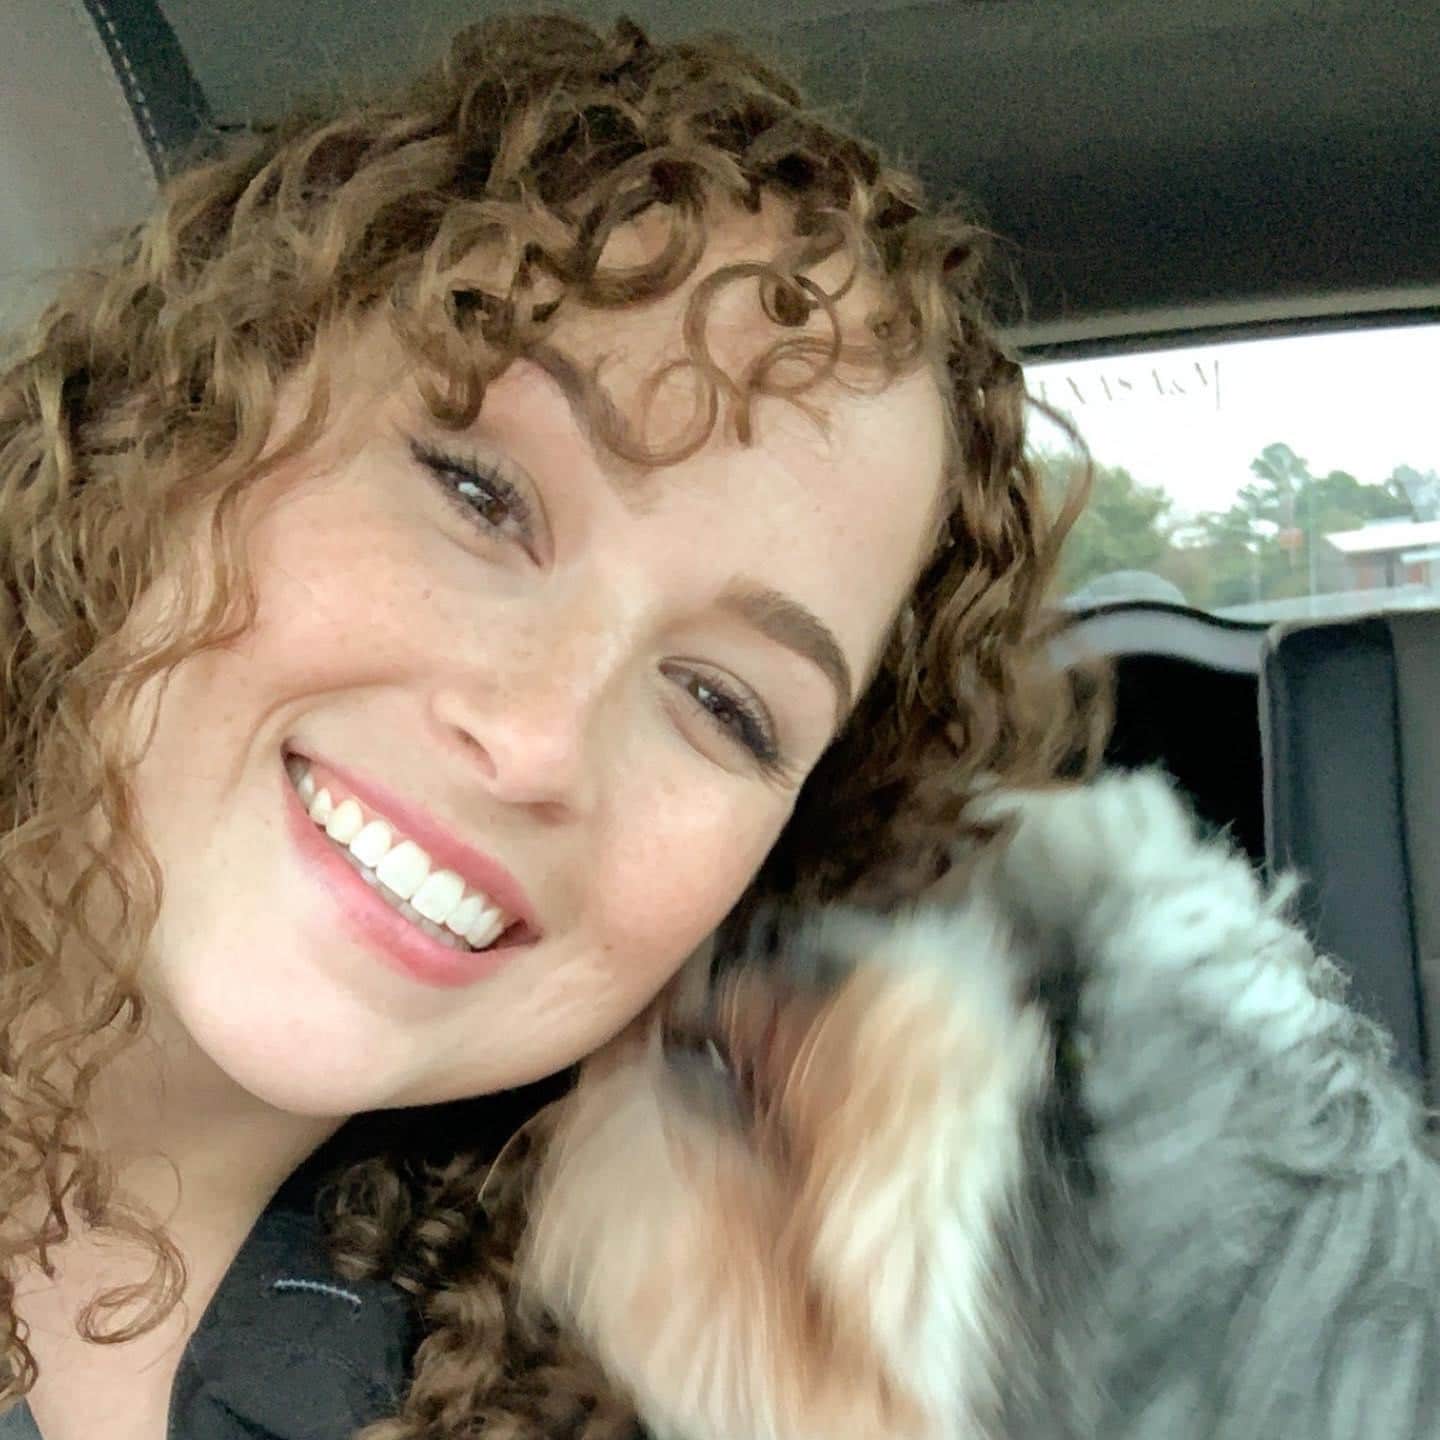 A young woman with curly brown hair receiving a kiss from a scruffy gray dog.